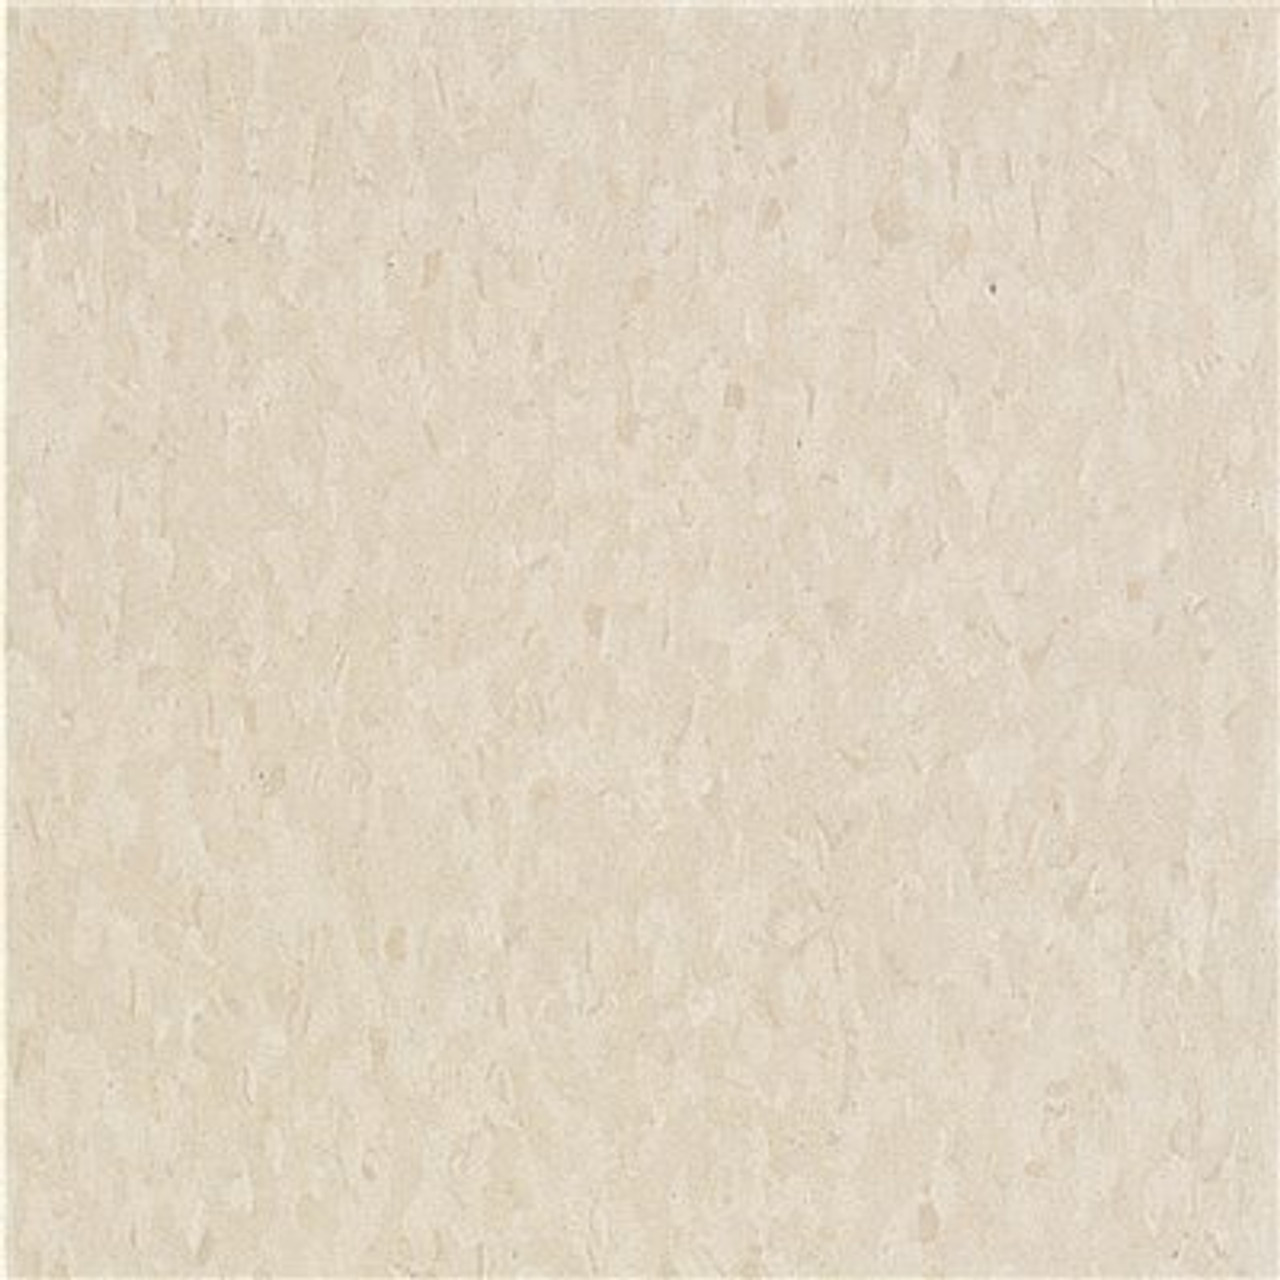 Armstrong Imperial Texture Vct 12 In. X 12 In. Washed Linen Standard Excelon Commercial Vinyl Tile (45 Sq. Ft. / Case)